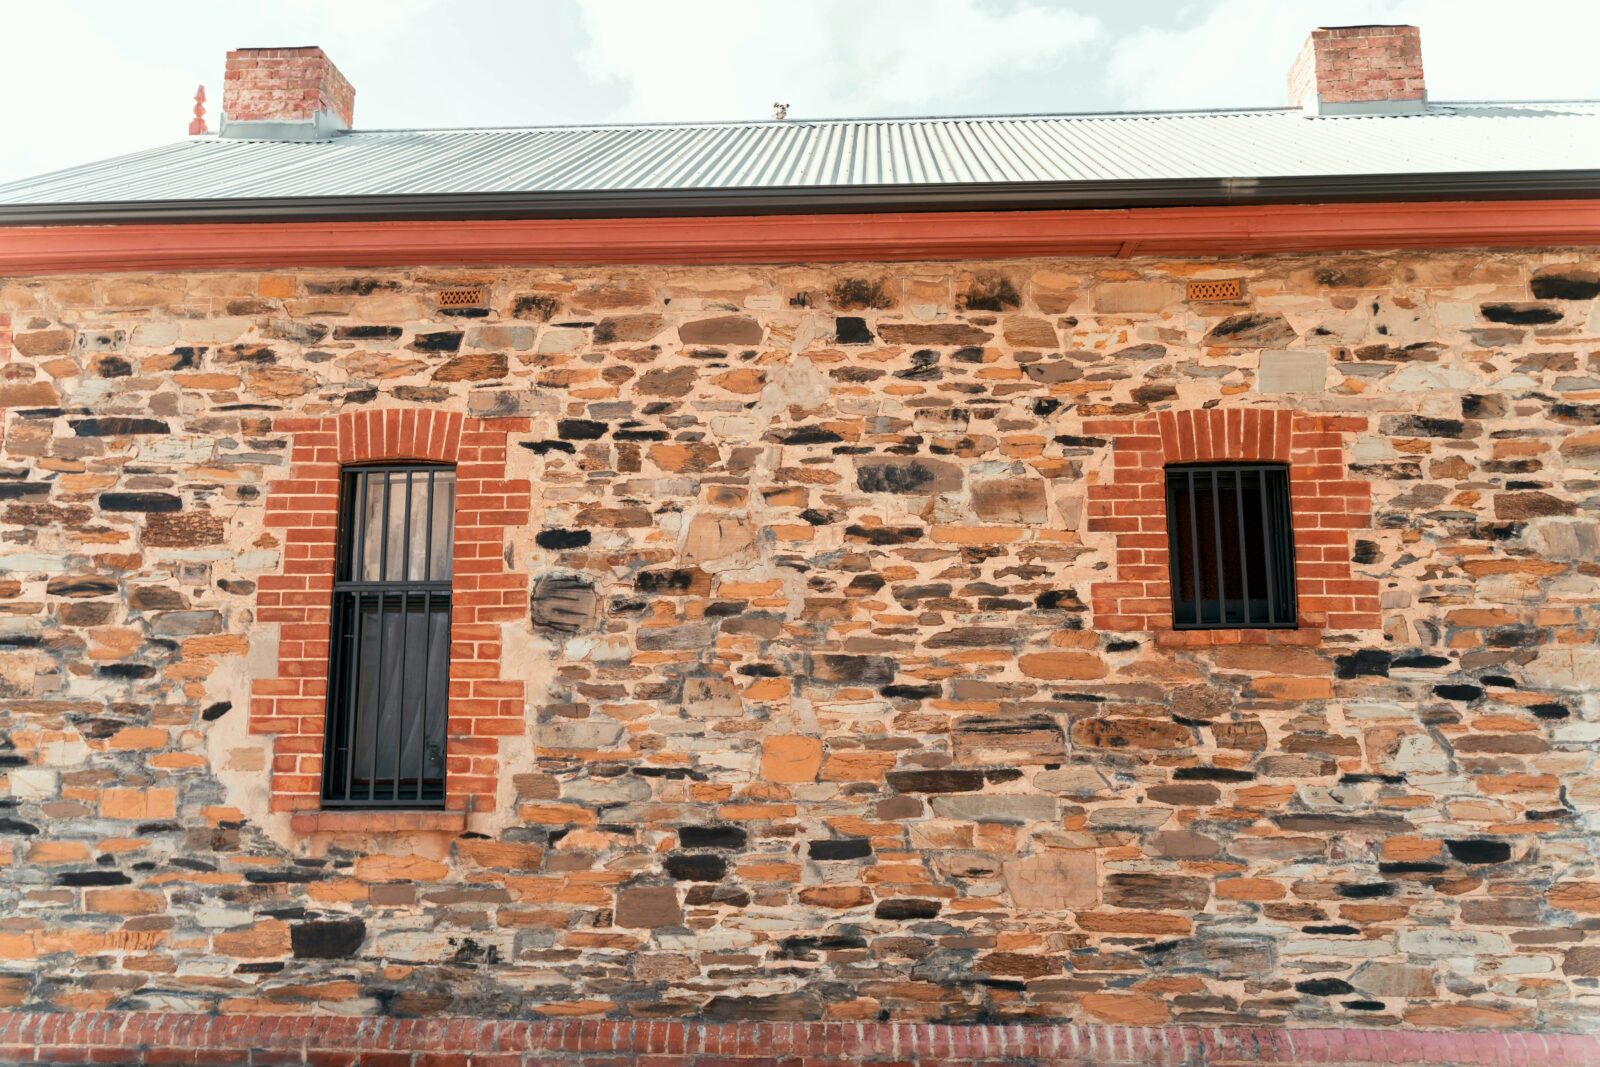 Once a horse stable; the Heritage exterior showcases original crimson brick and masonry stone.